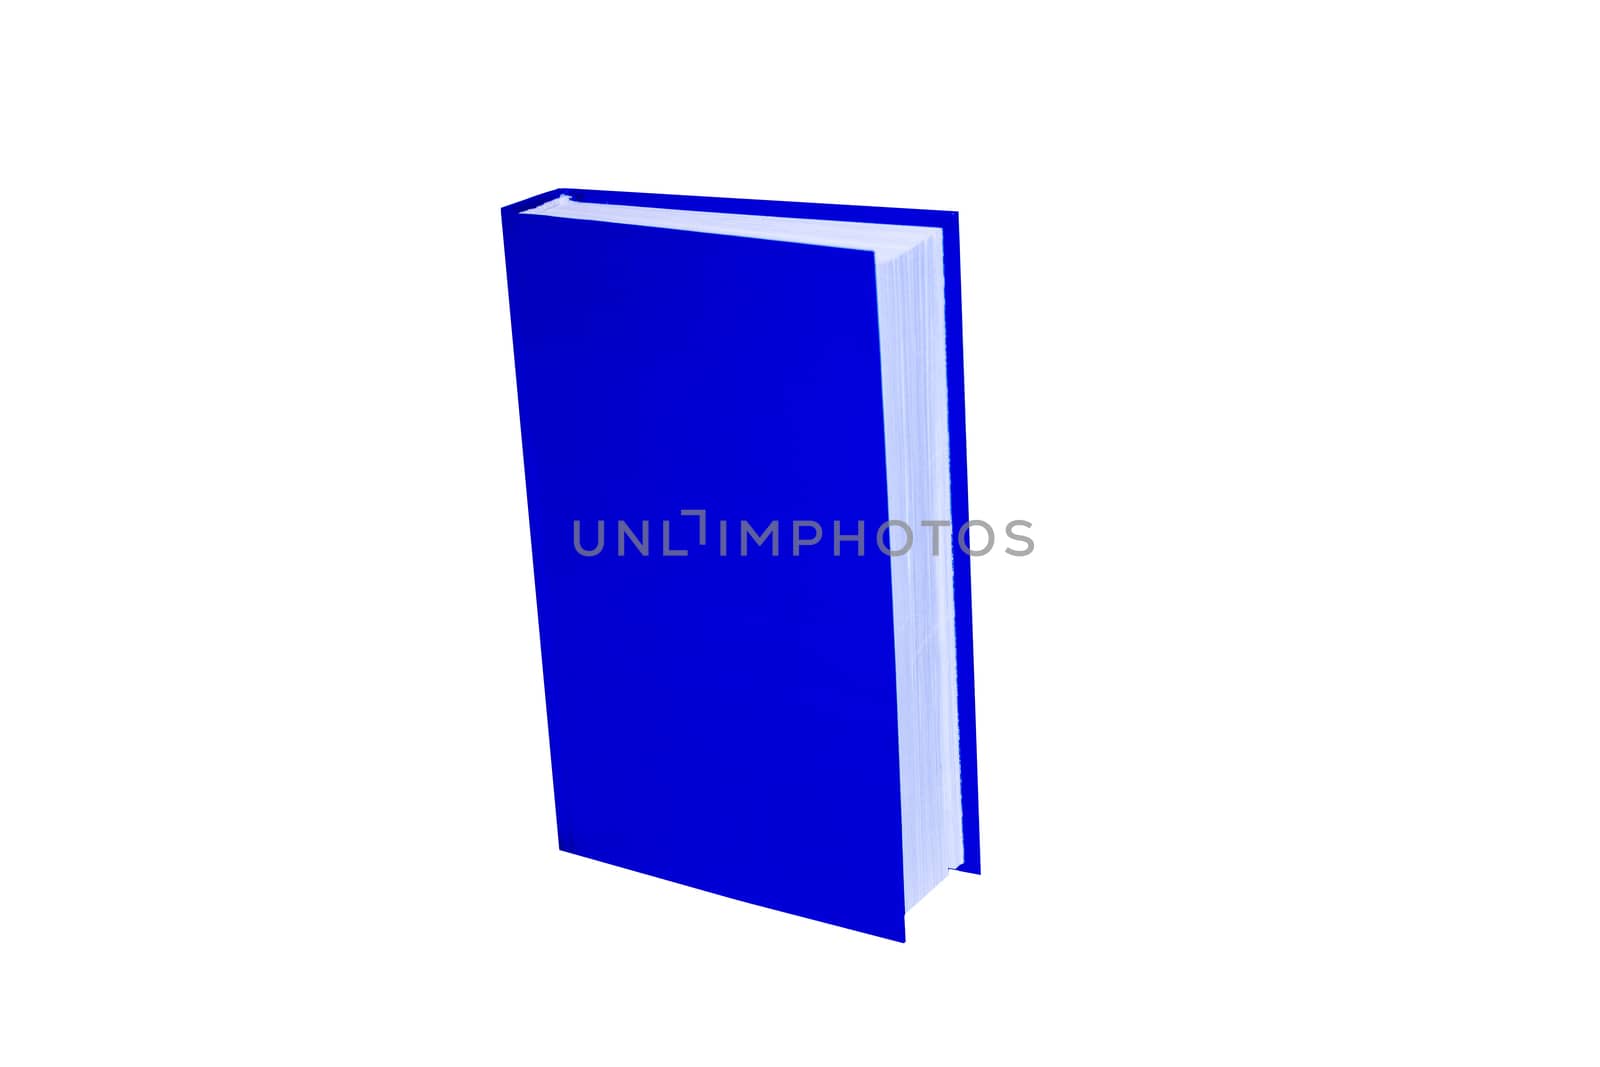 blue book isolated on a white background